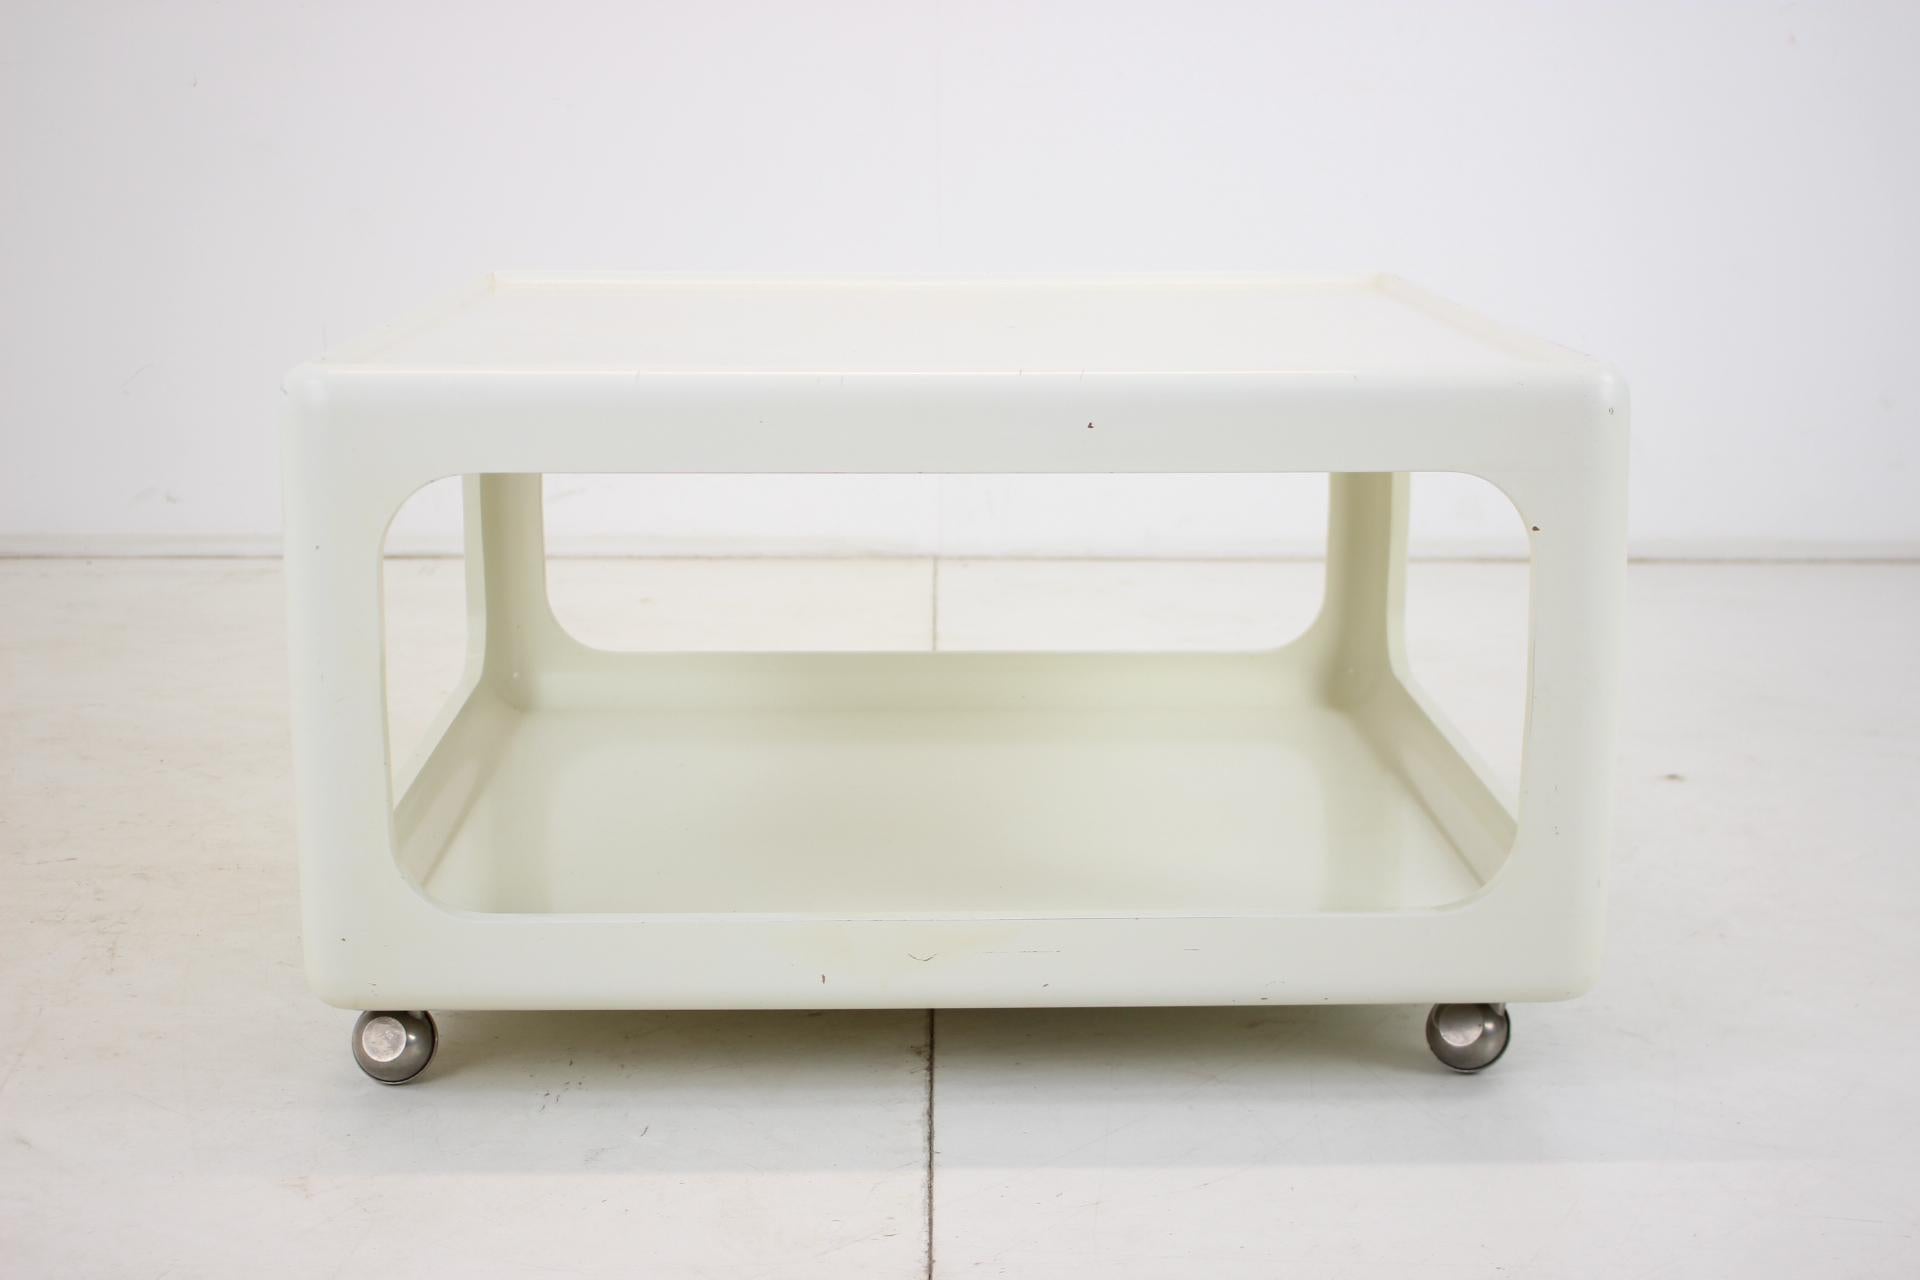 Mid-Century Space Age Coffee Table, Peter Ghyczy and Ernst Moeckl, Germany, 1970 For Sale 1